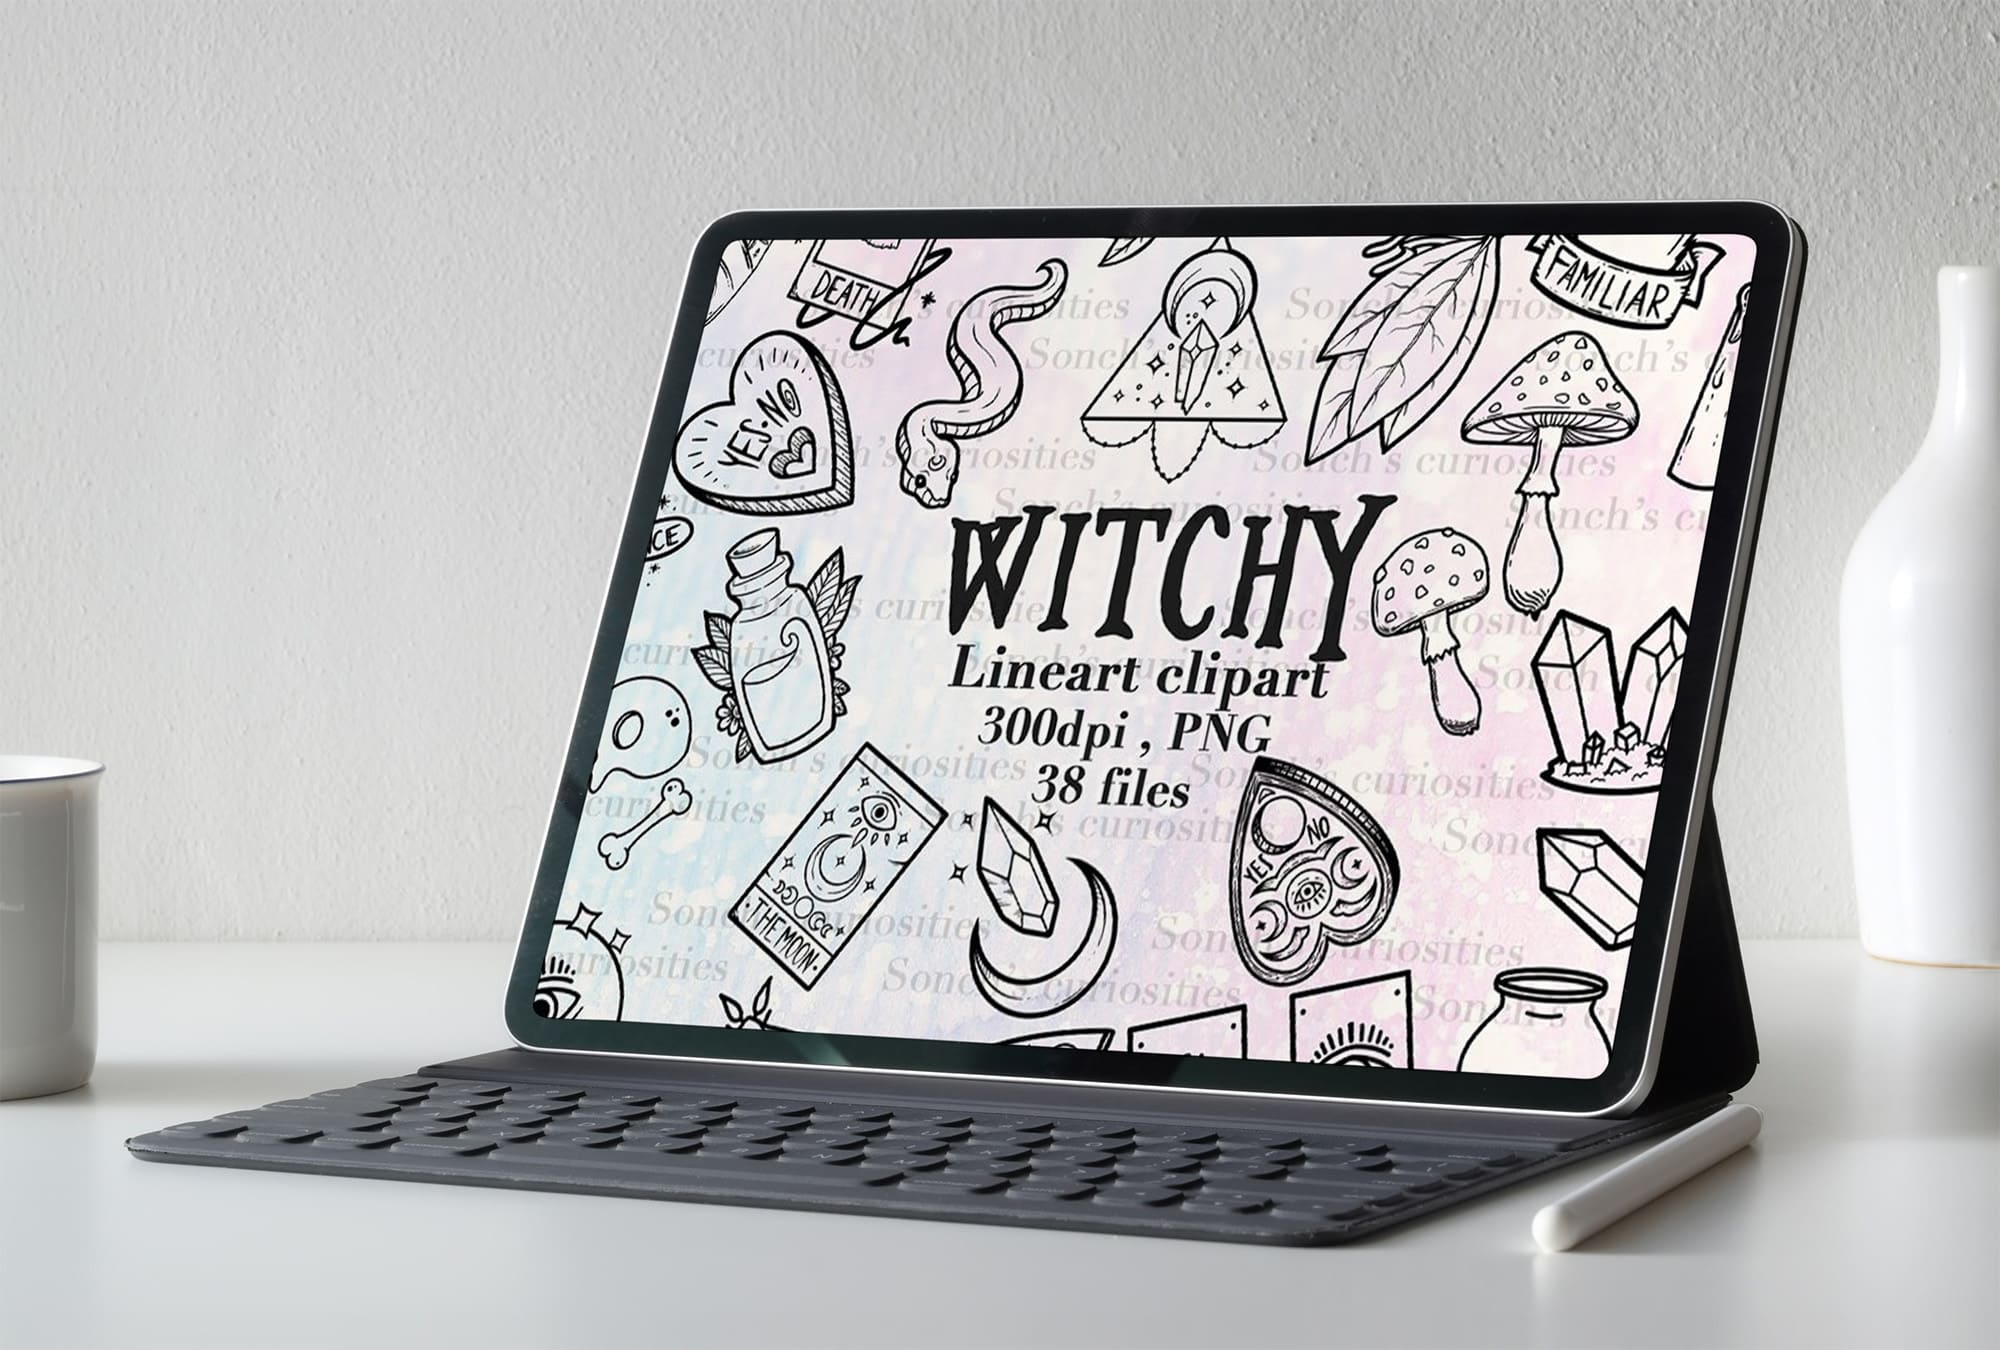 witch inspired linear clipart tablet mockup.